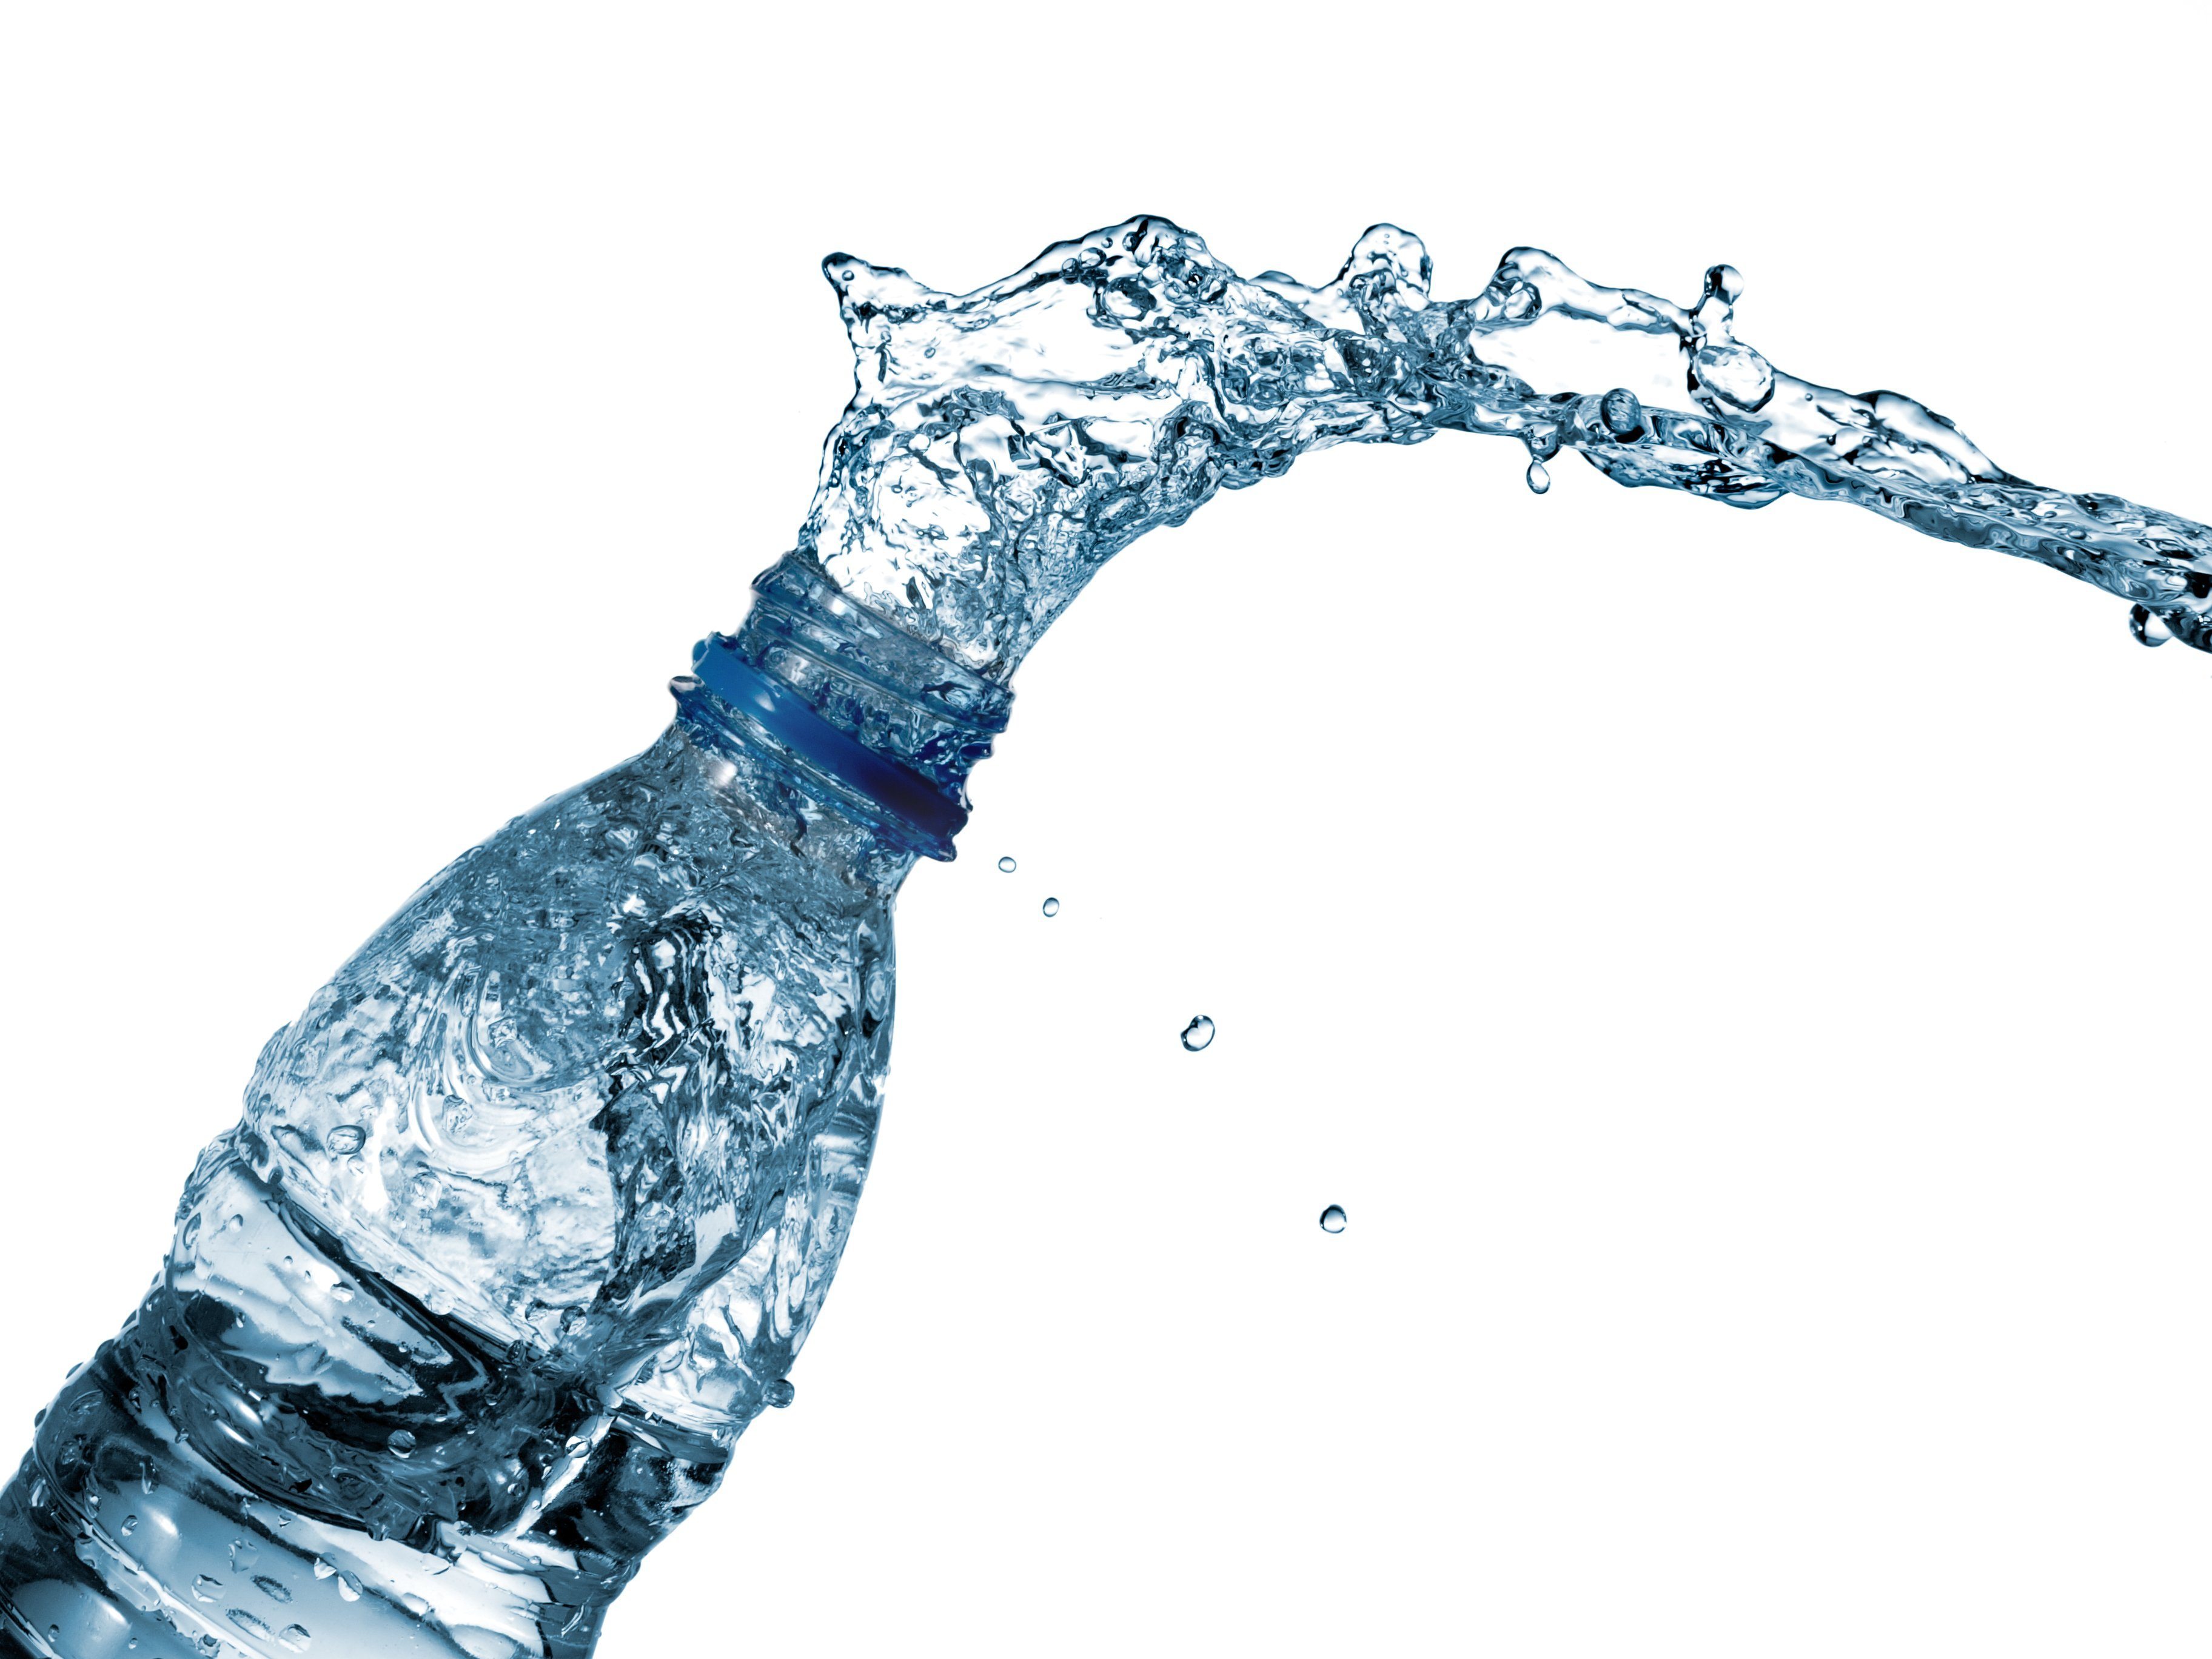 Bottled Water Will Outsell Soda for the First Time Ever This Year